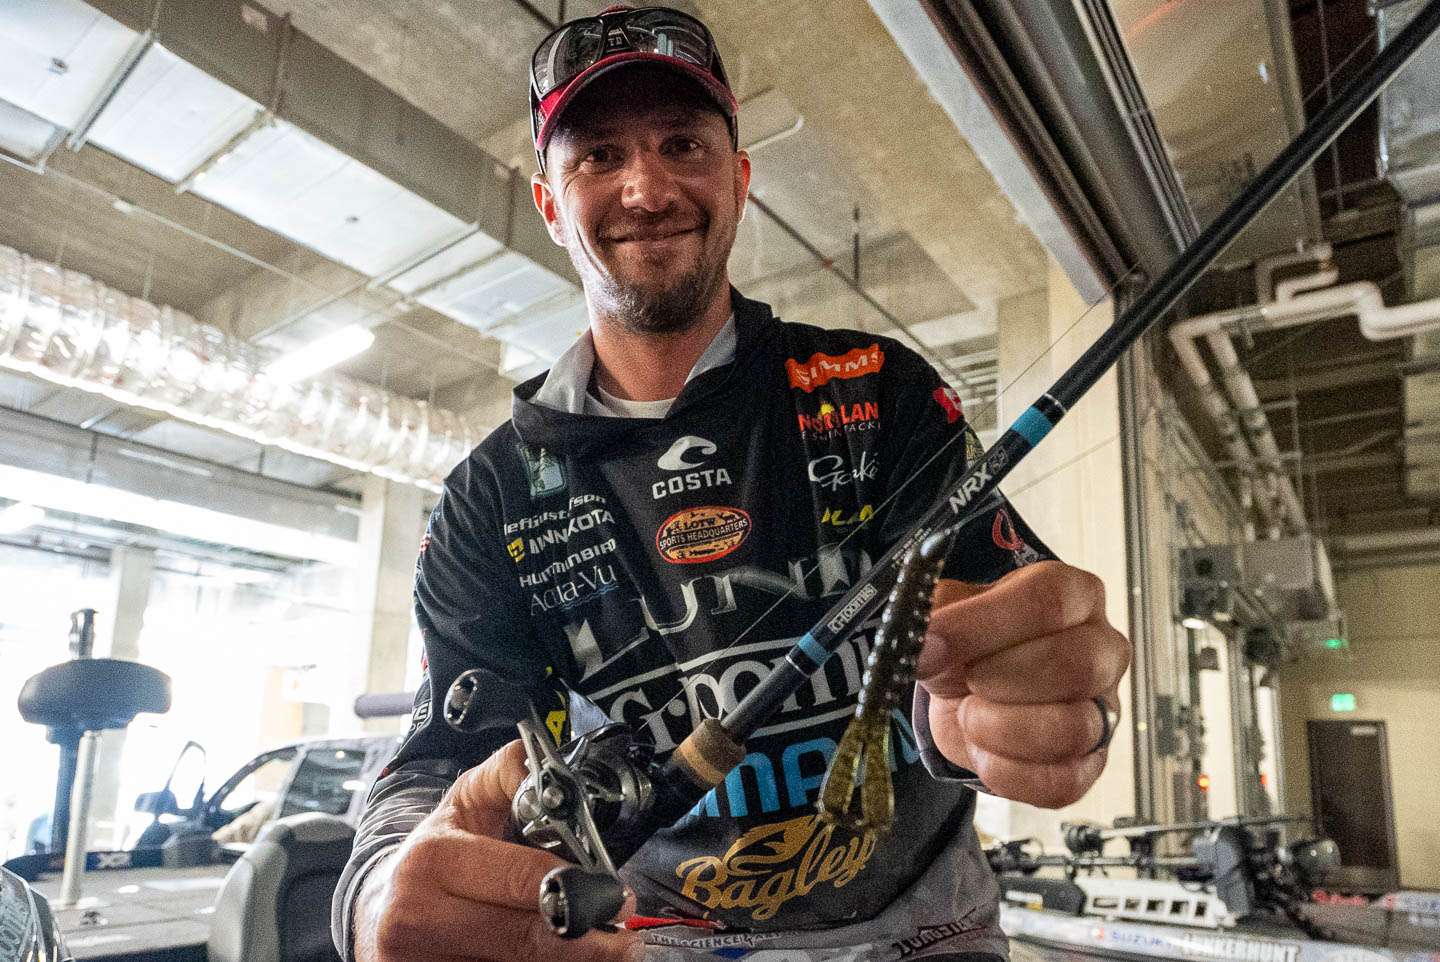 <b>Jeff Gustafson (21st; 28-7)</b><br>
Jeff Gustafson rigged up with a heavy-duty bait for the heavy-duty fishing conditions. 